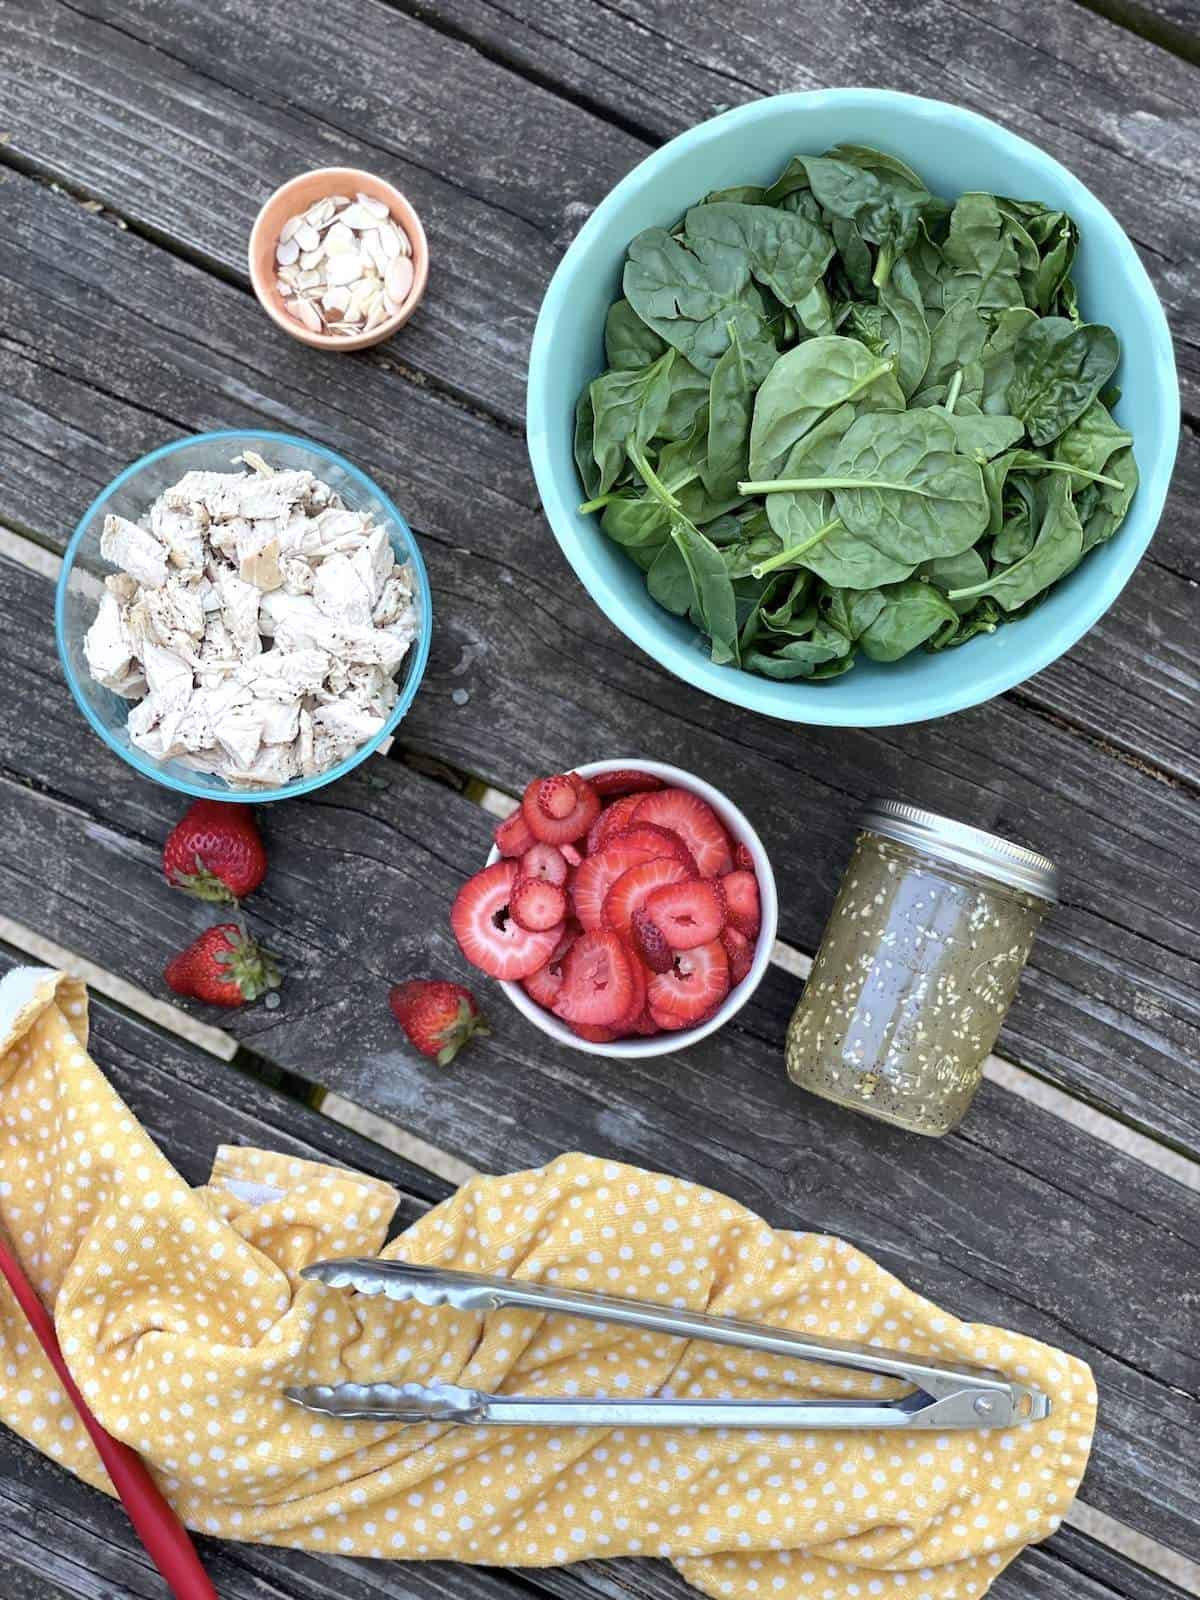 The ingredients in strawberry spinach chicken salad, laid out.